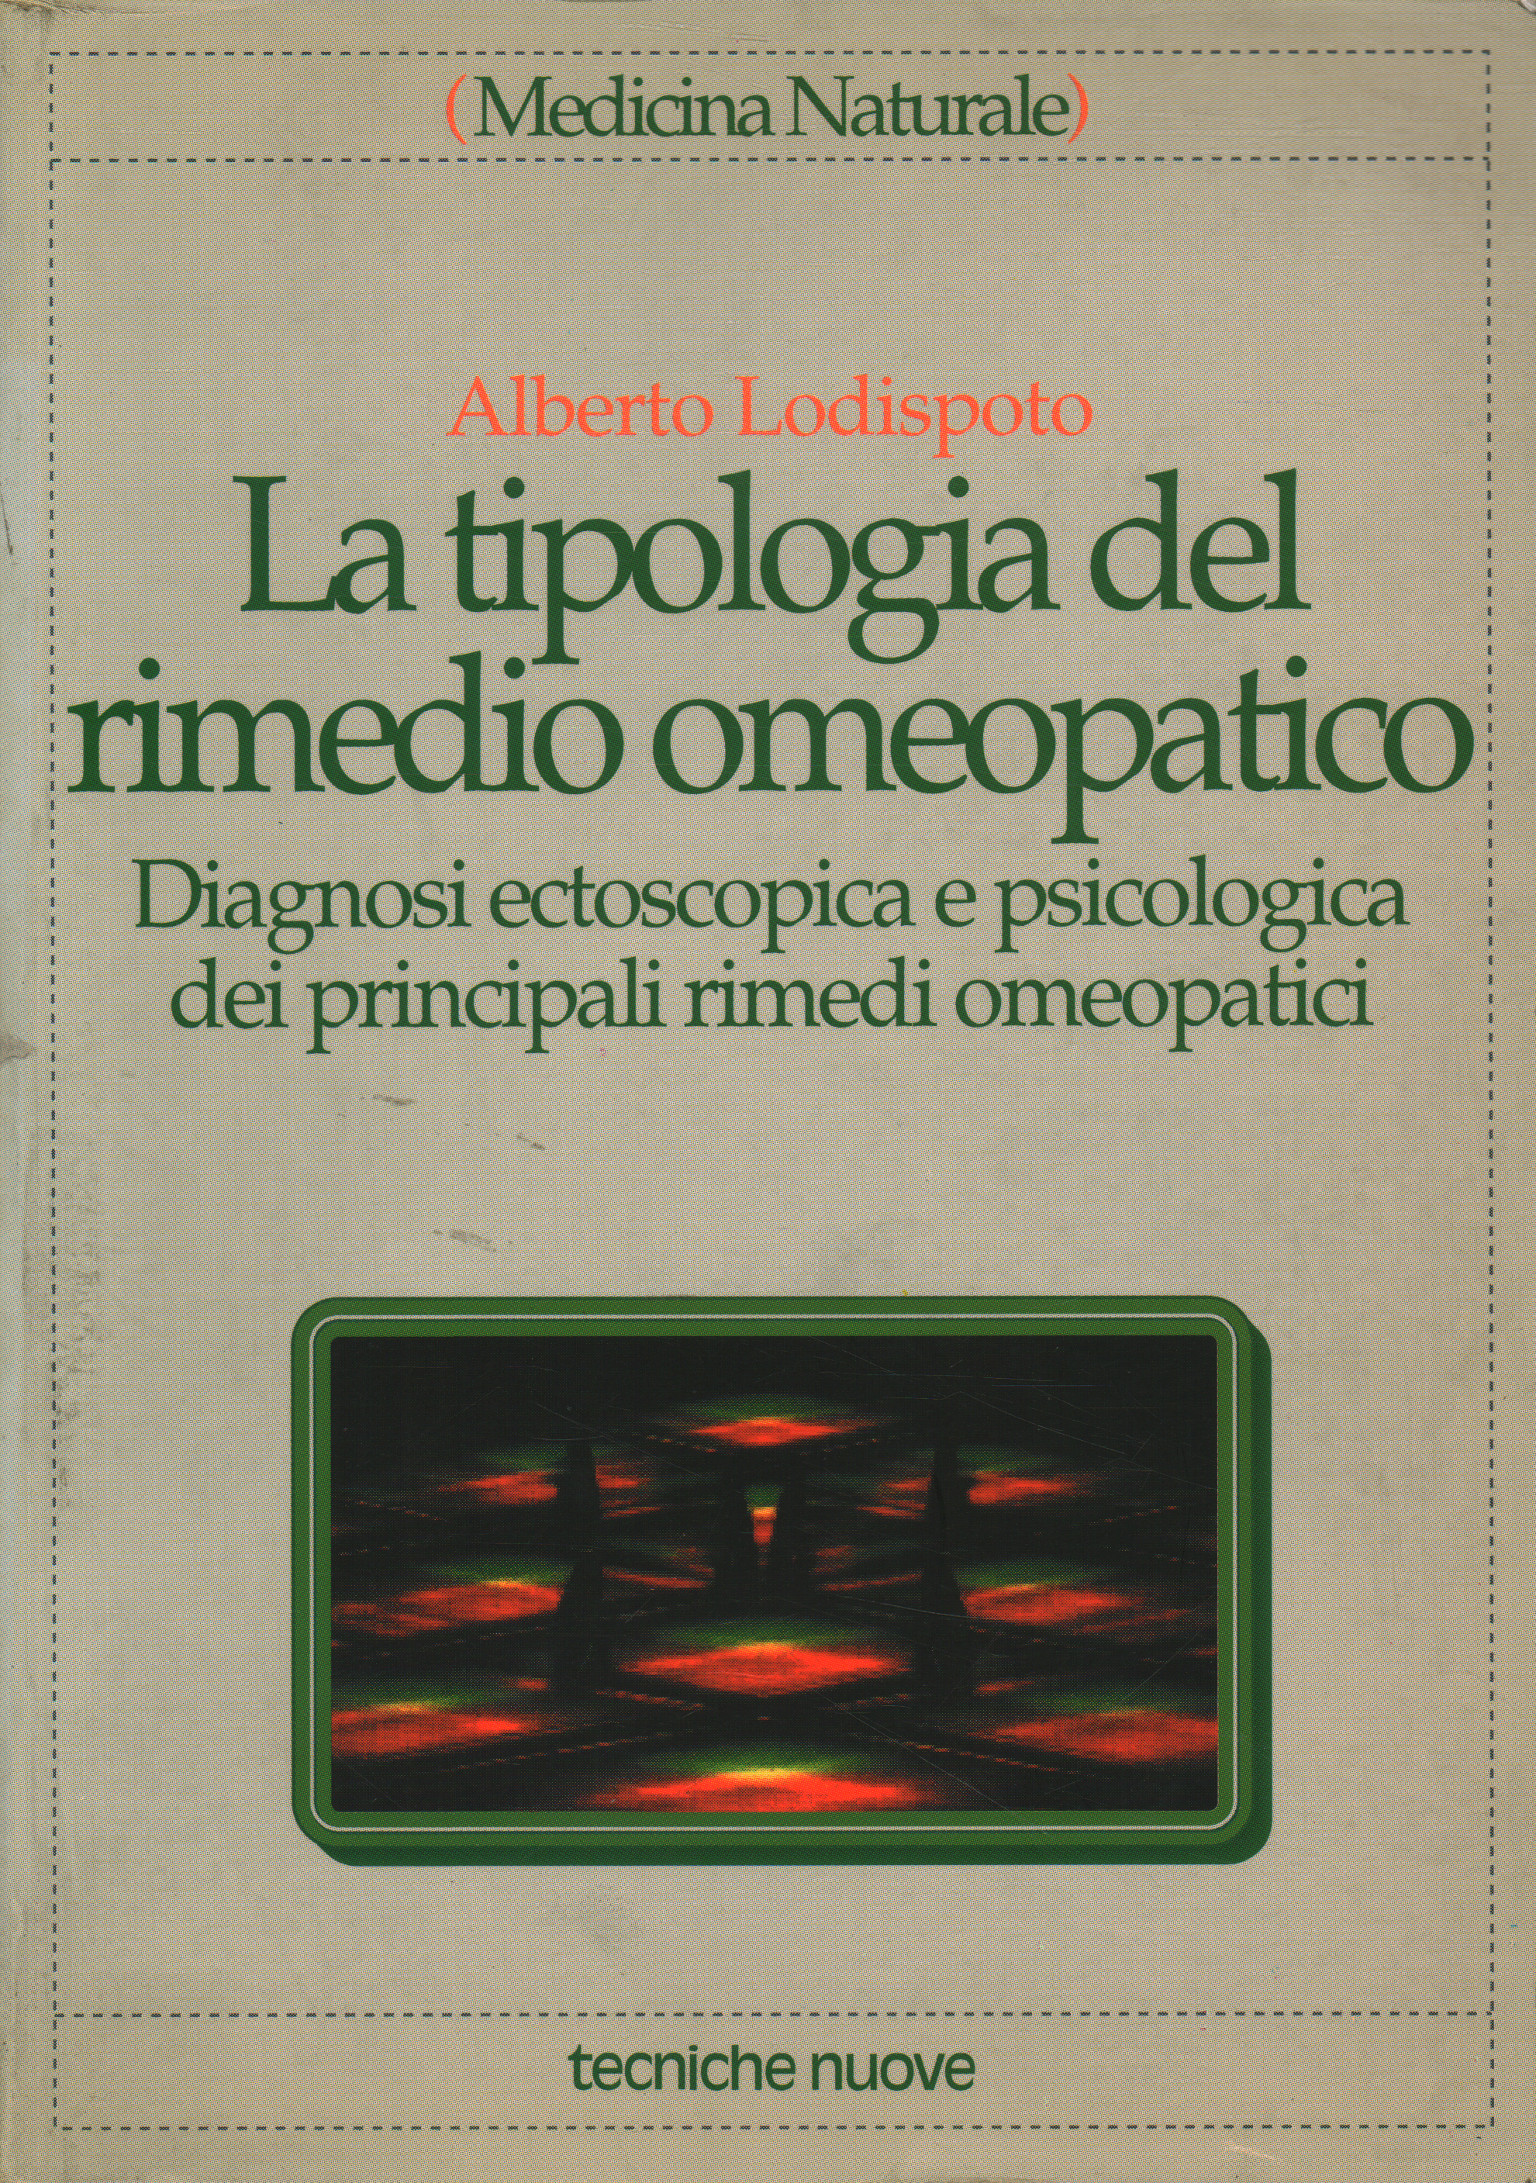 The type of homeopathic remedy, Alberto Lodispoto